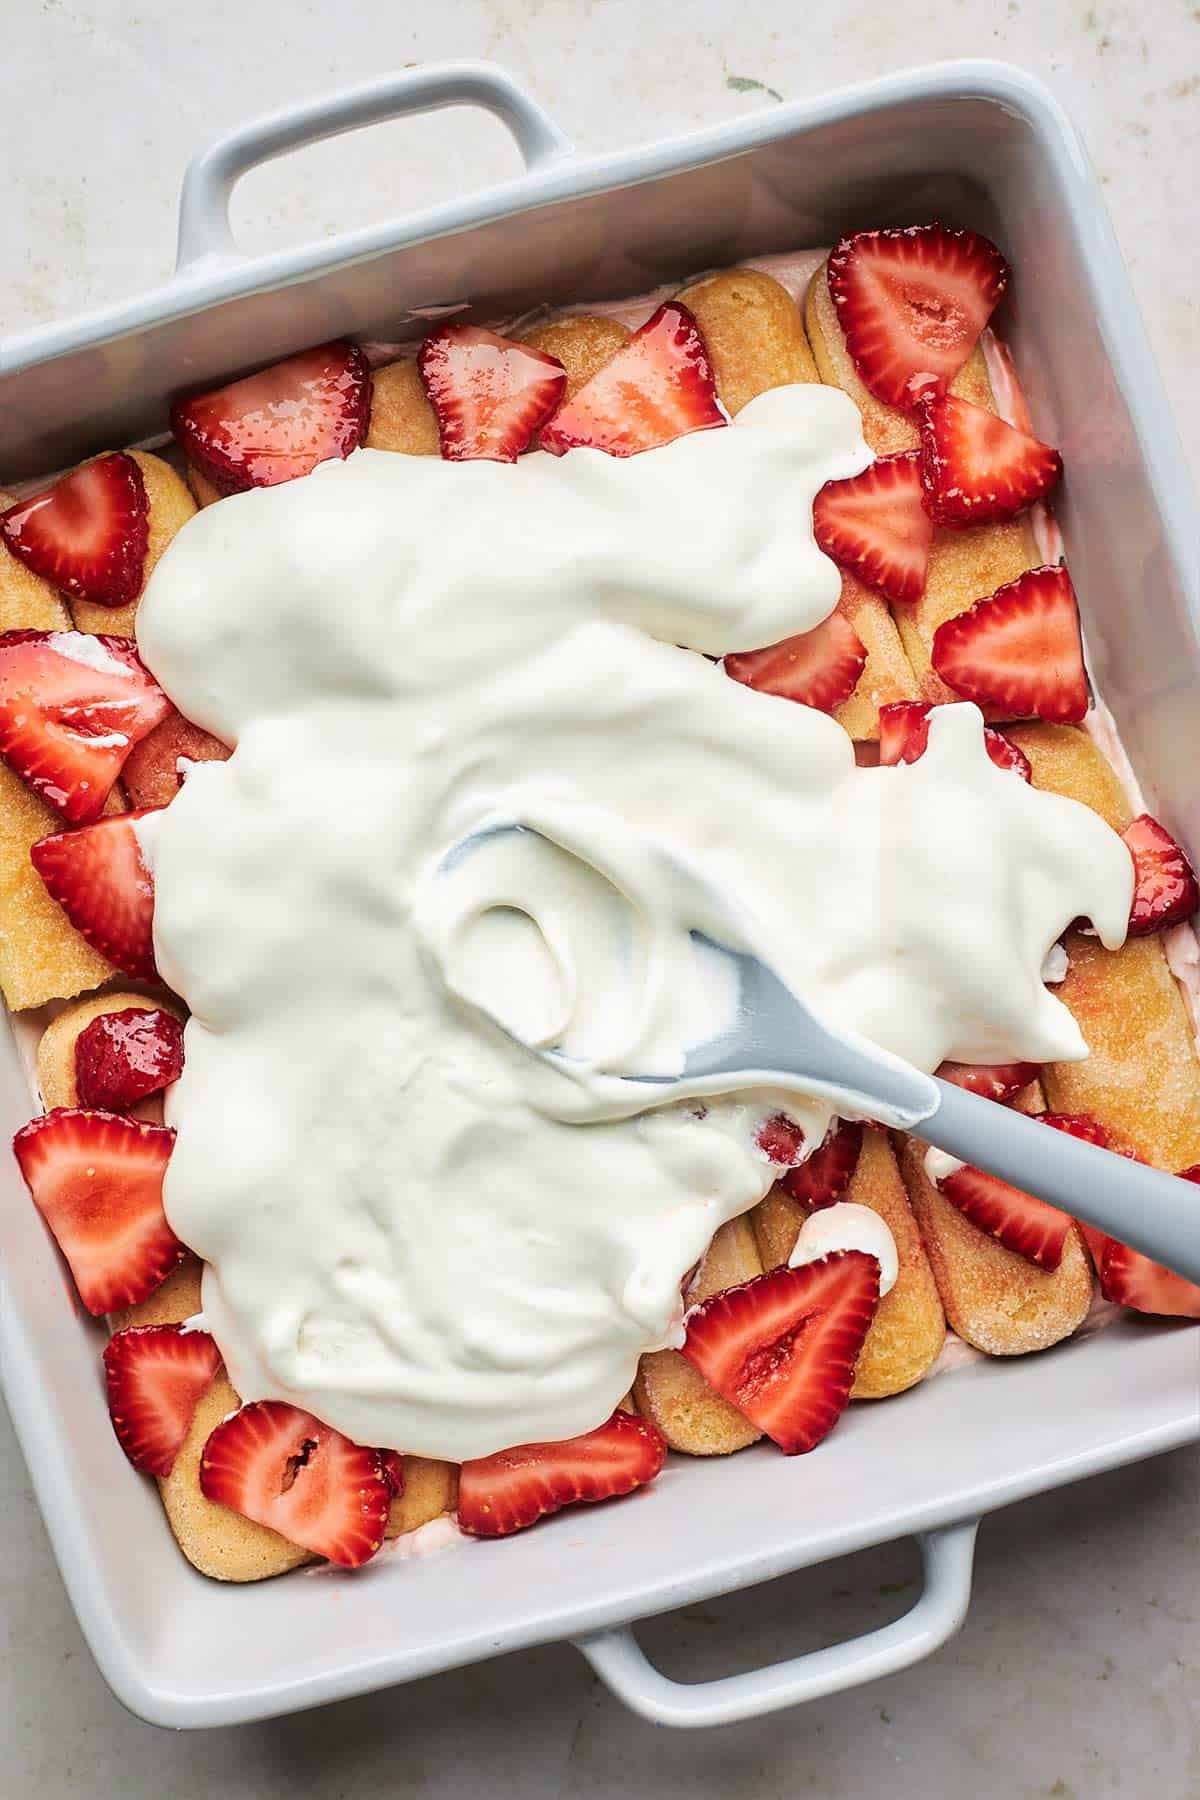 Whipped cream on top of the sliced strawberries.